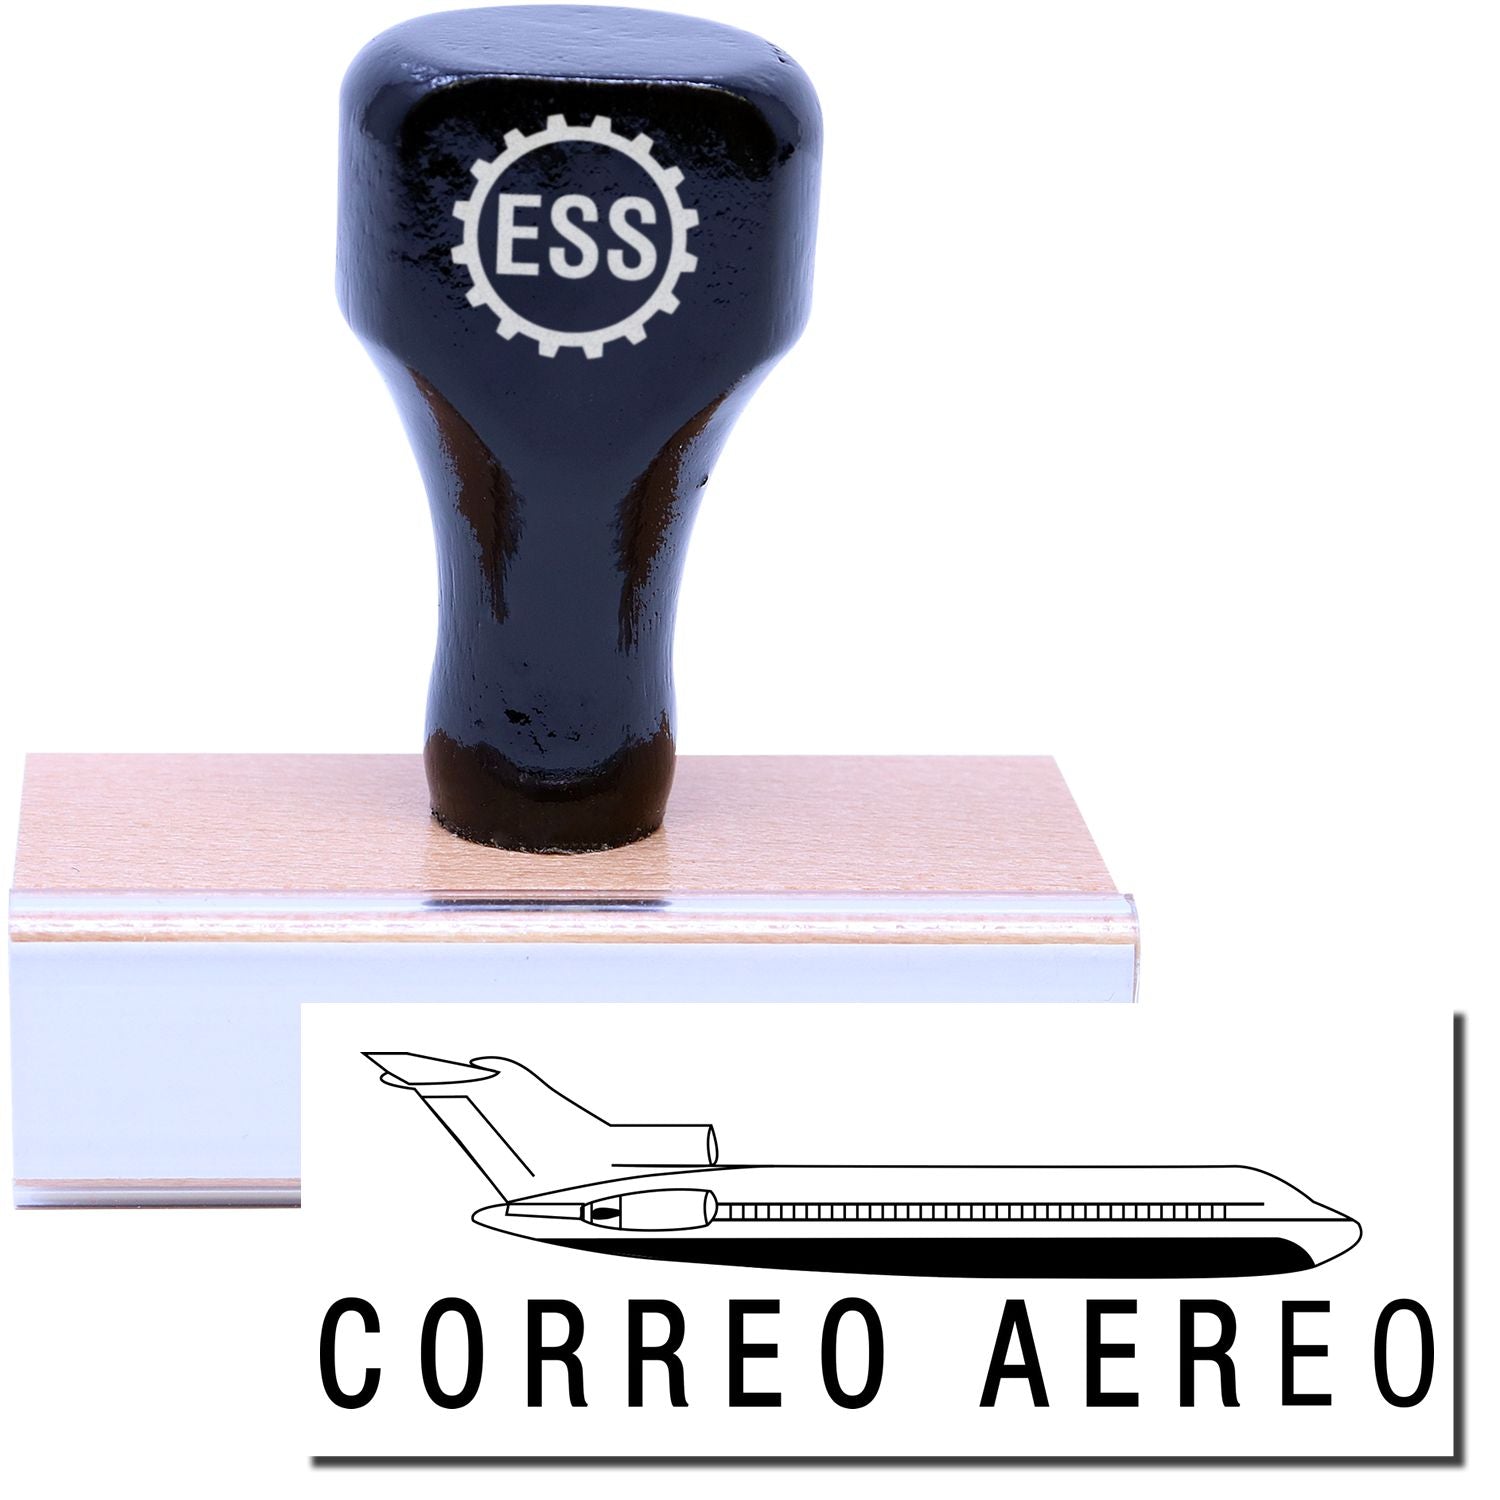 A stock office rubber stamp with a stamped image showing how the text "CORREO AERO" with an icon of a plane above the text is displayed after stamping.